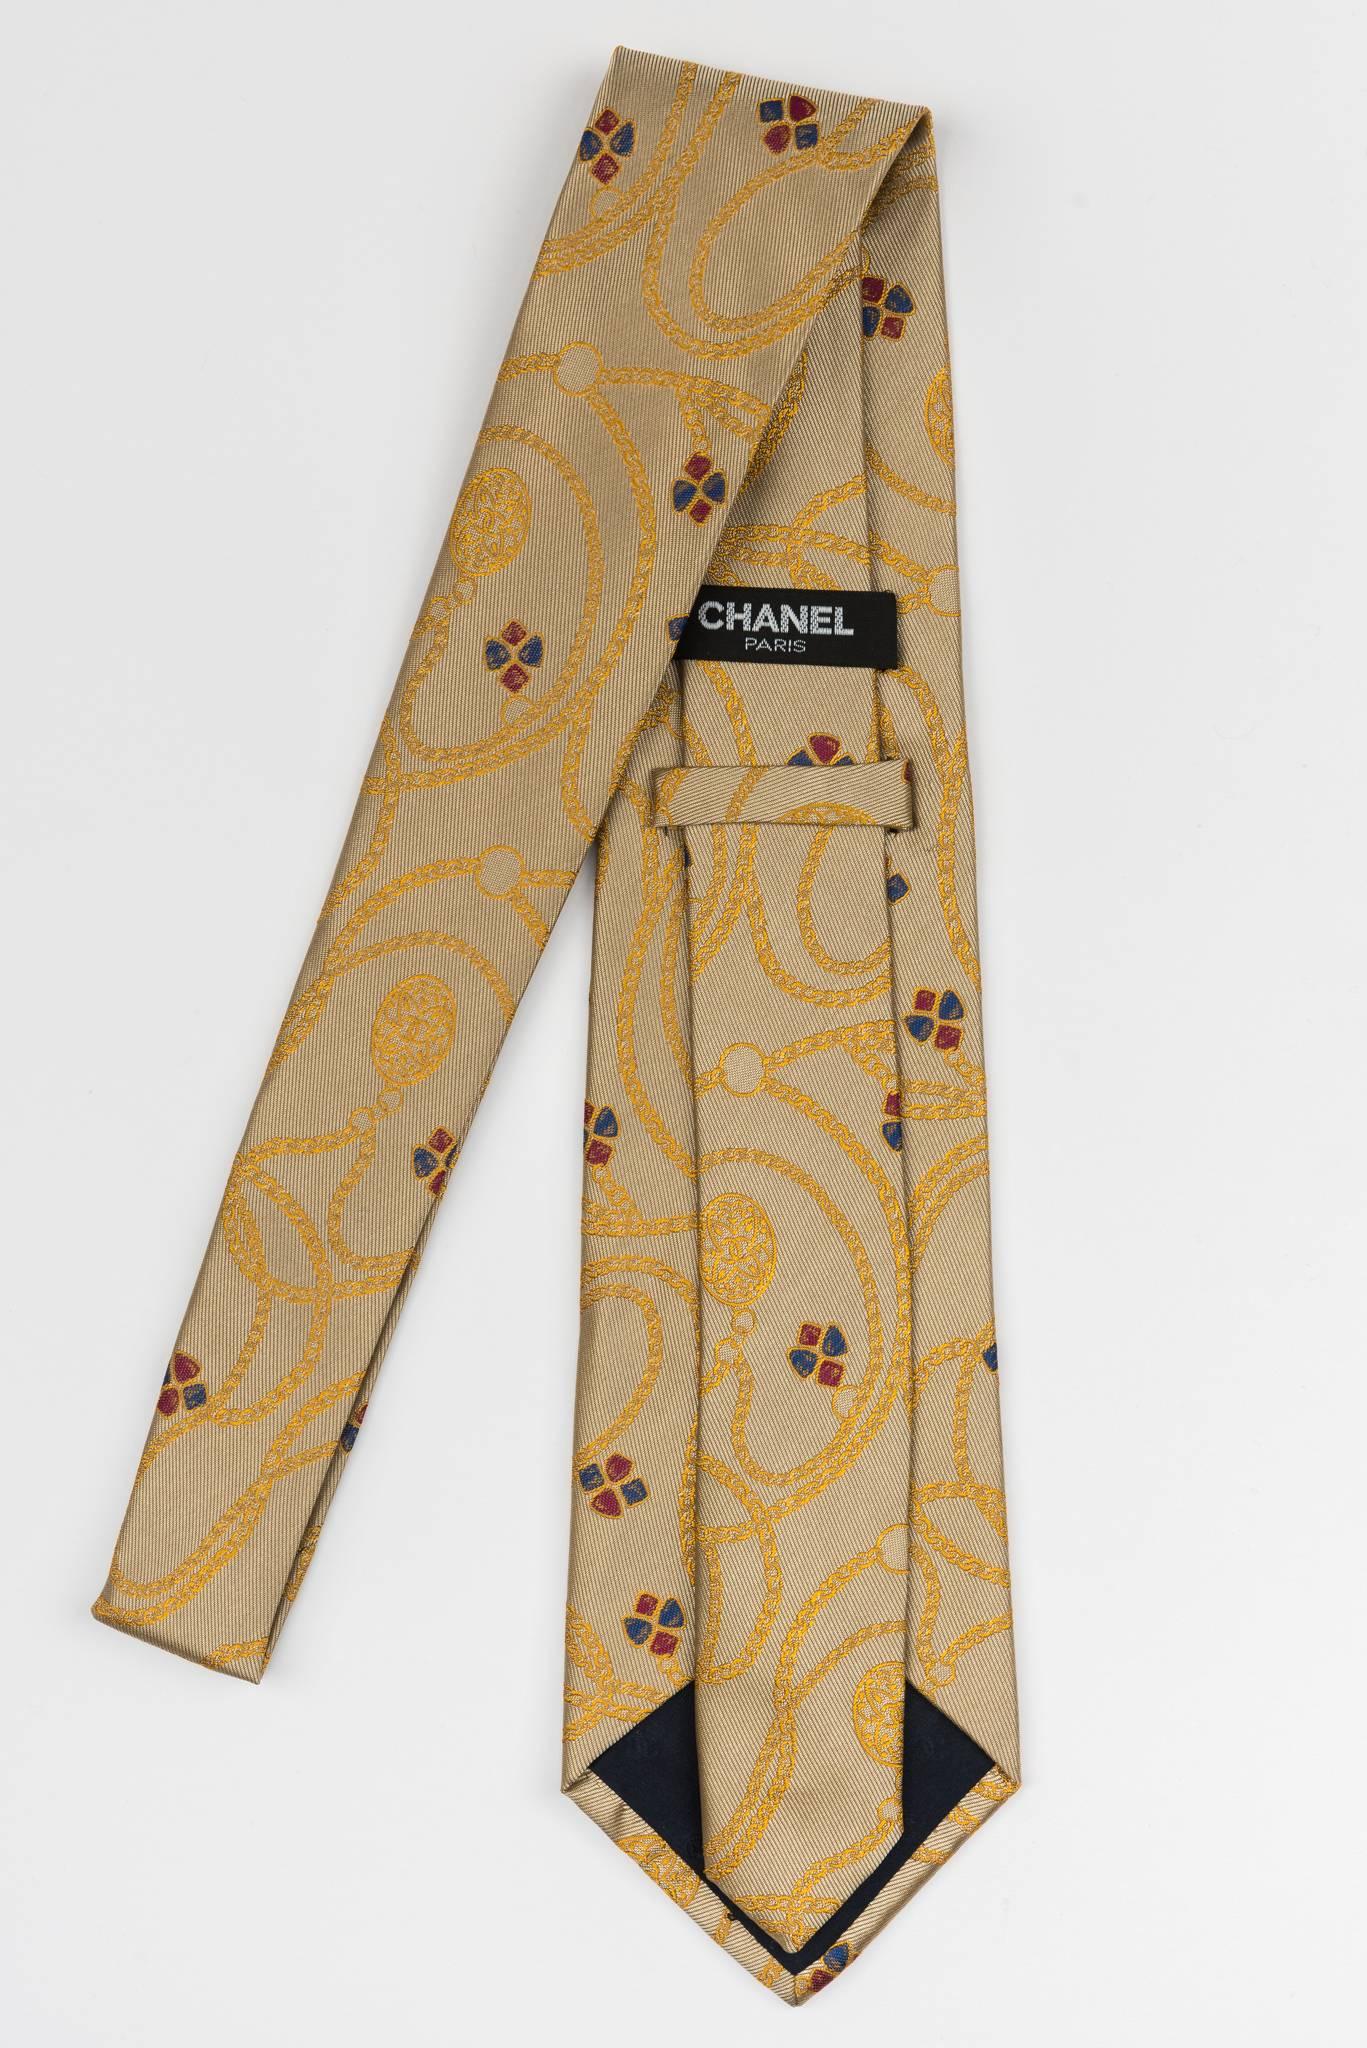 Chanel new in the original packing. Gold silk tie with multi colored gripoix detail. Excellent unworn condition.